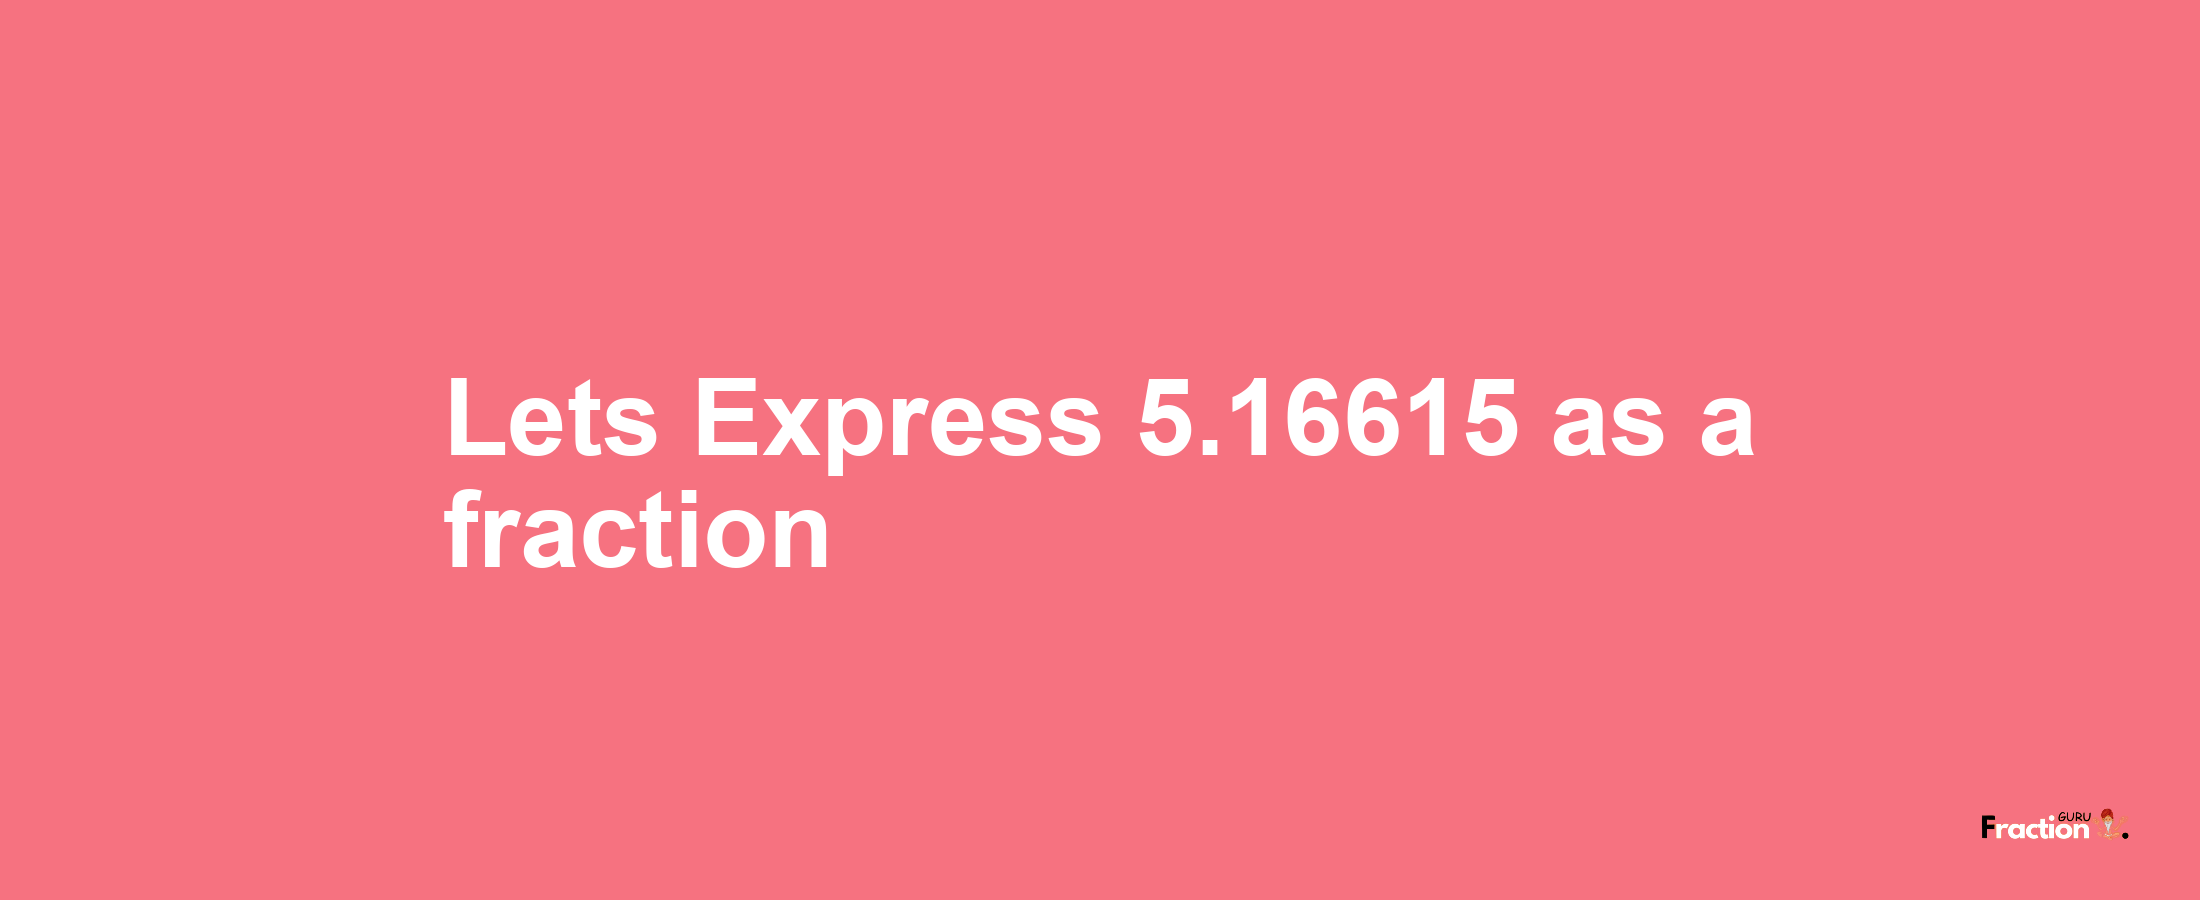 Lets Express 5.16615 as afraction